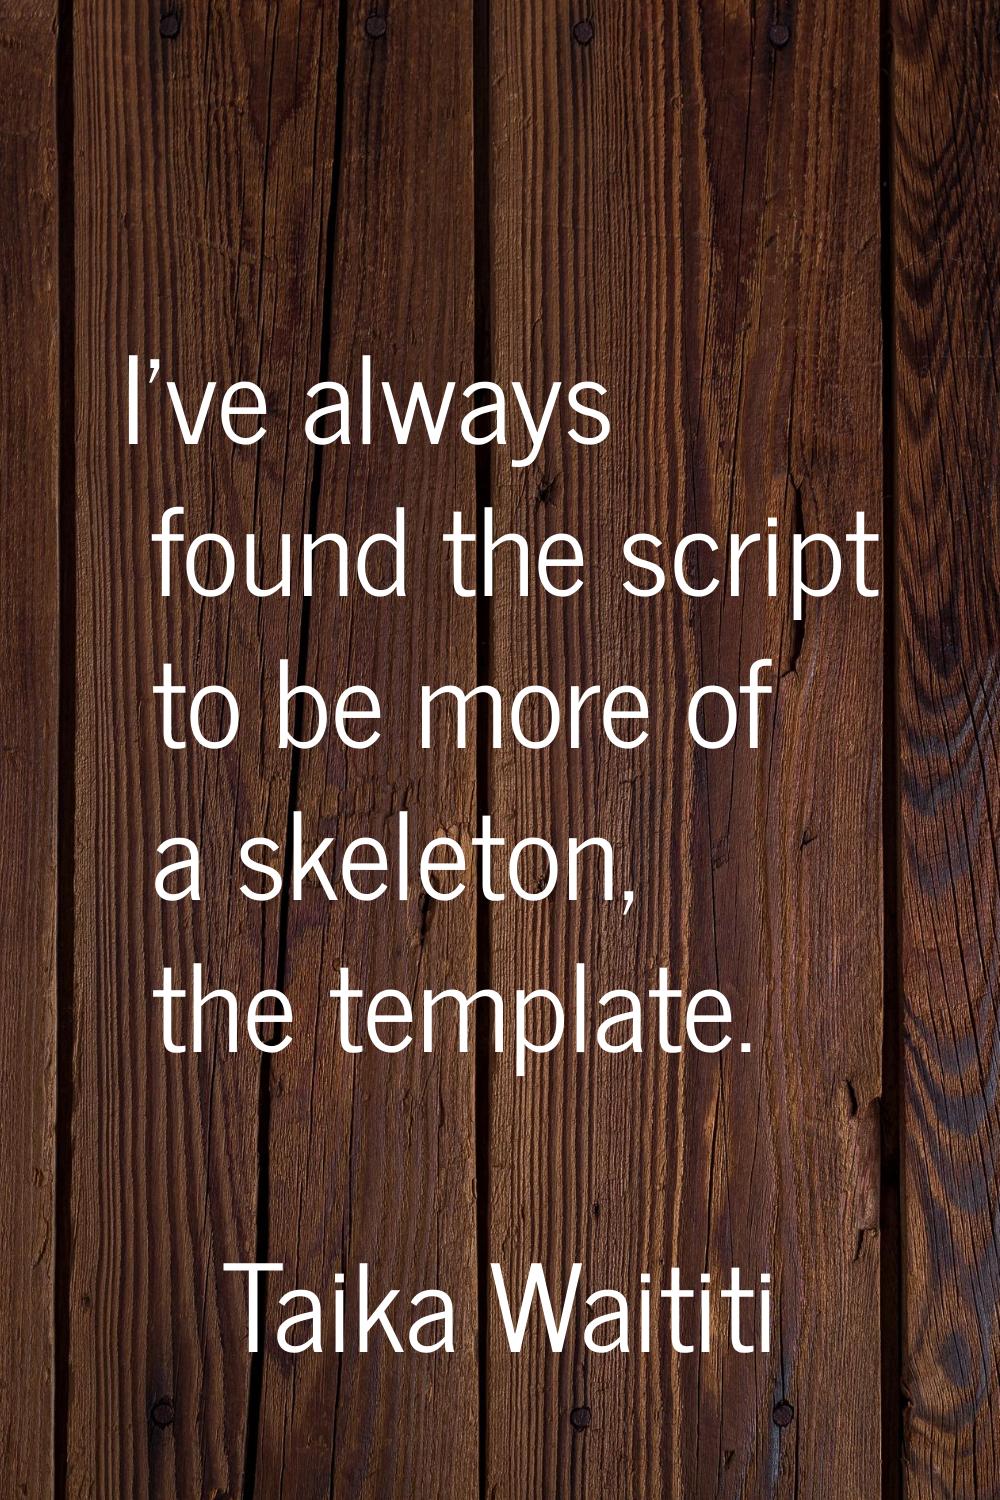 I've always found the script to be more of a skeleton, the template.